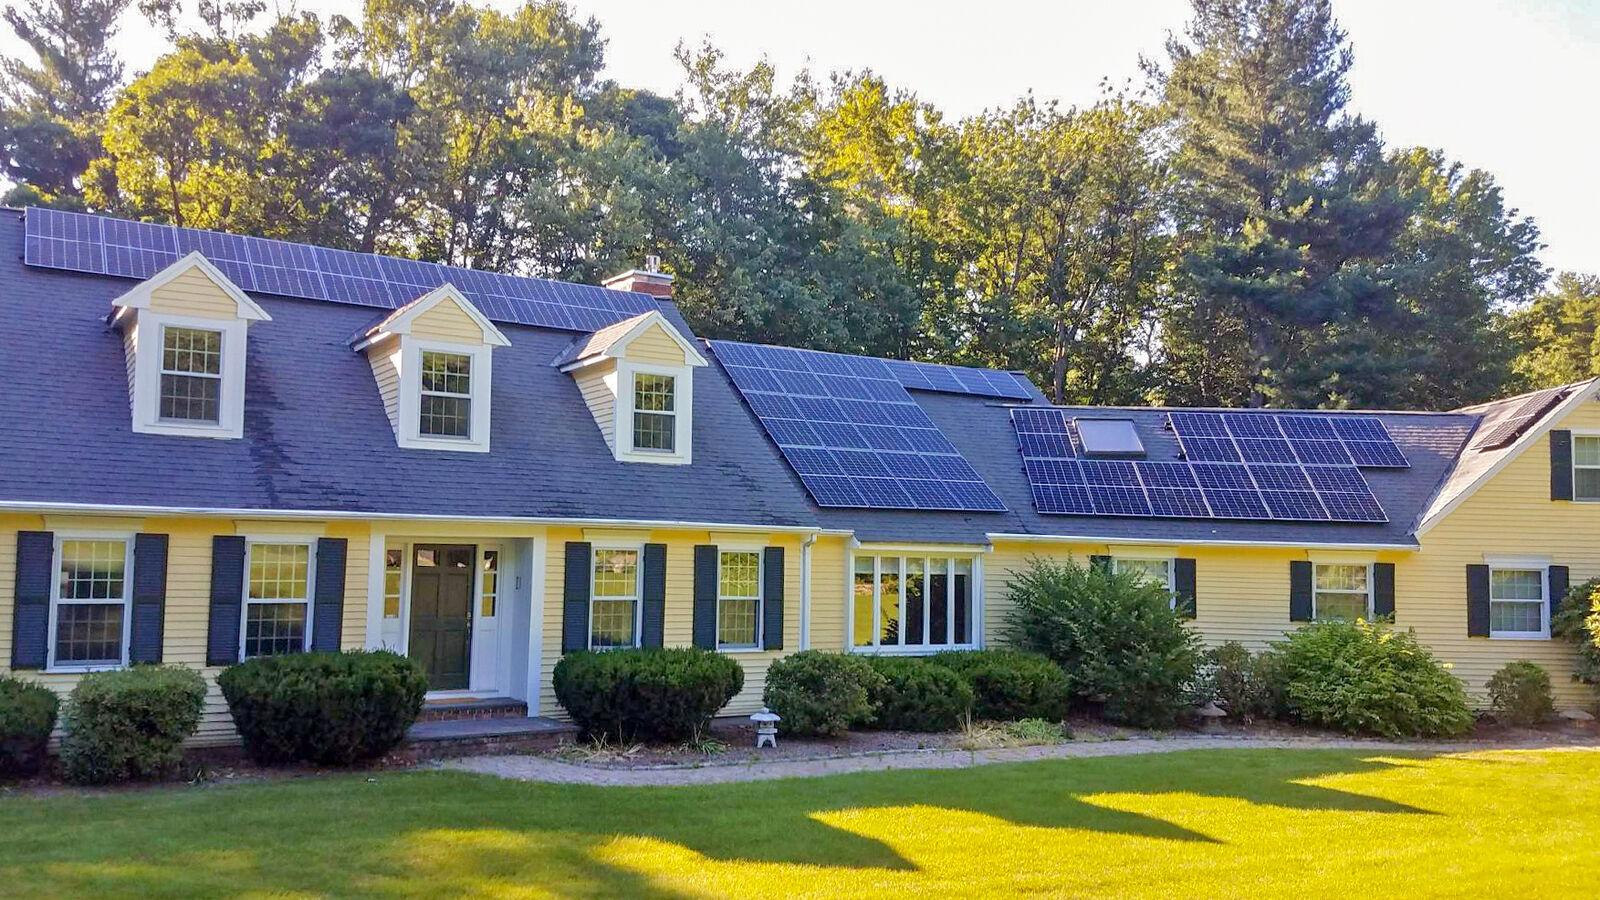 How Do You Sell Your House? With Solar Power!